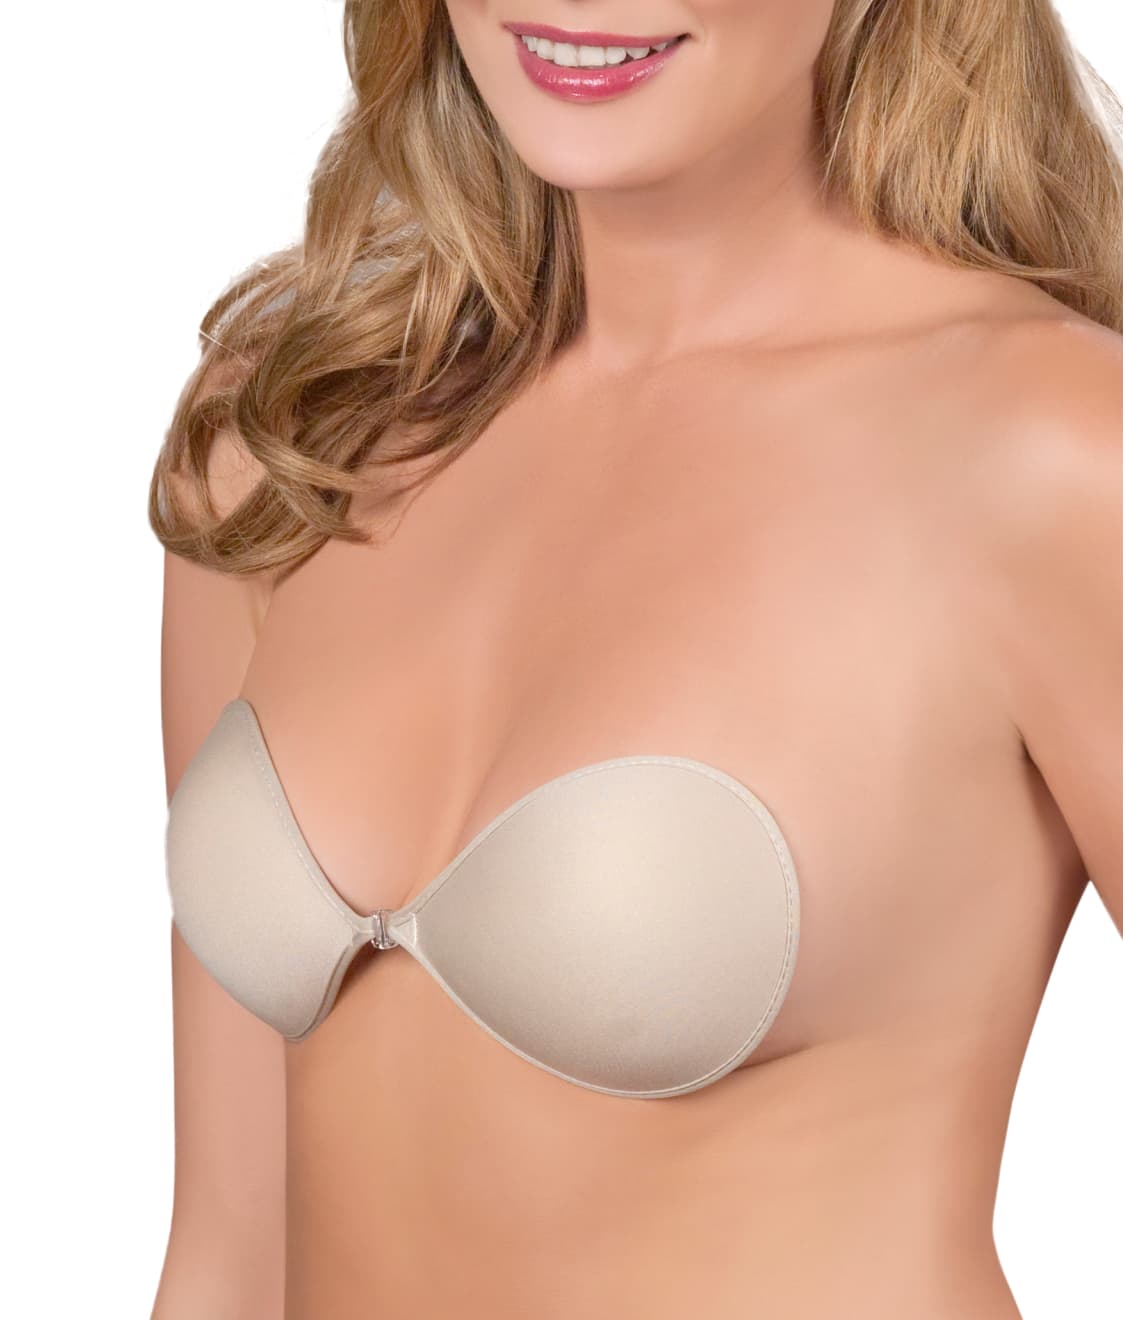 Fashion Forms NuBra Ultralight Backless Wire-Free Bra DD-Cups & Reviews